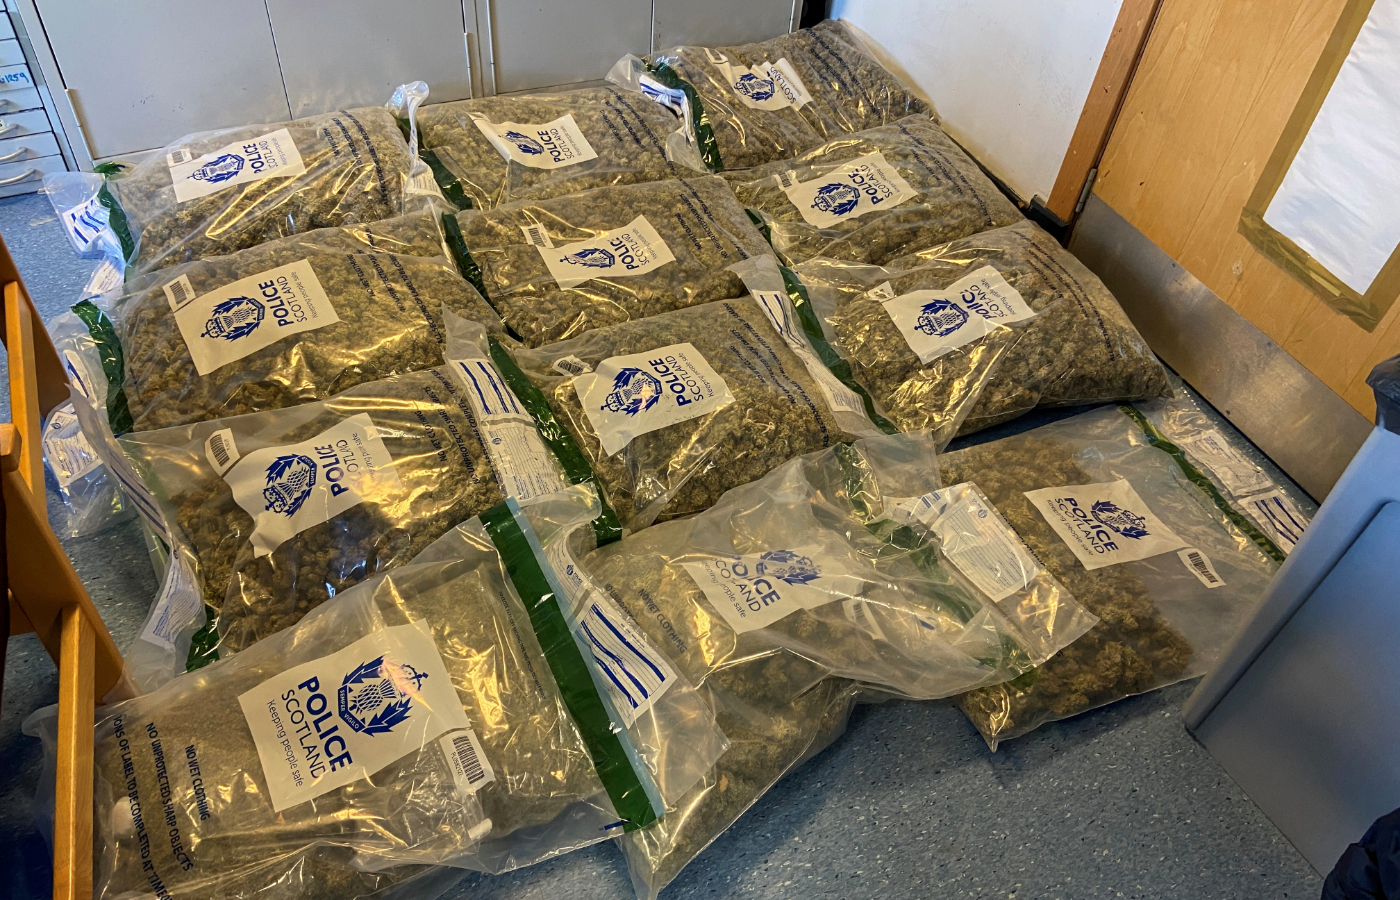 Police confirmed they seized around 36kg of 'ready for sale' cannabis.